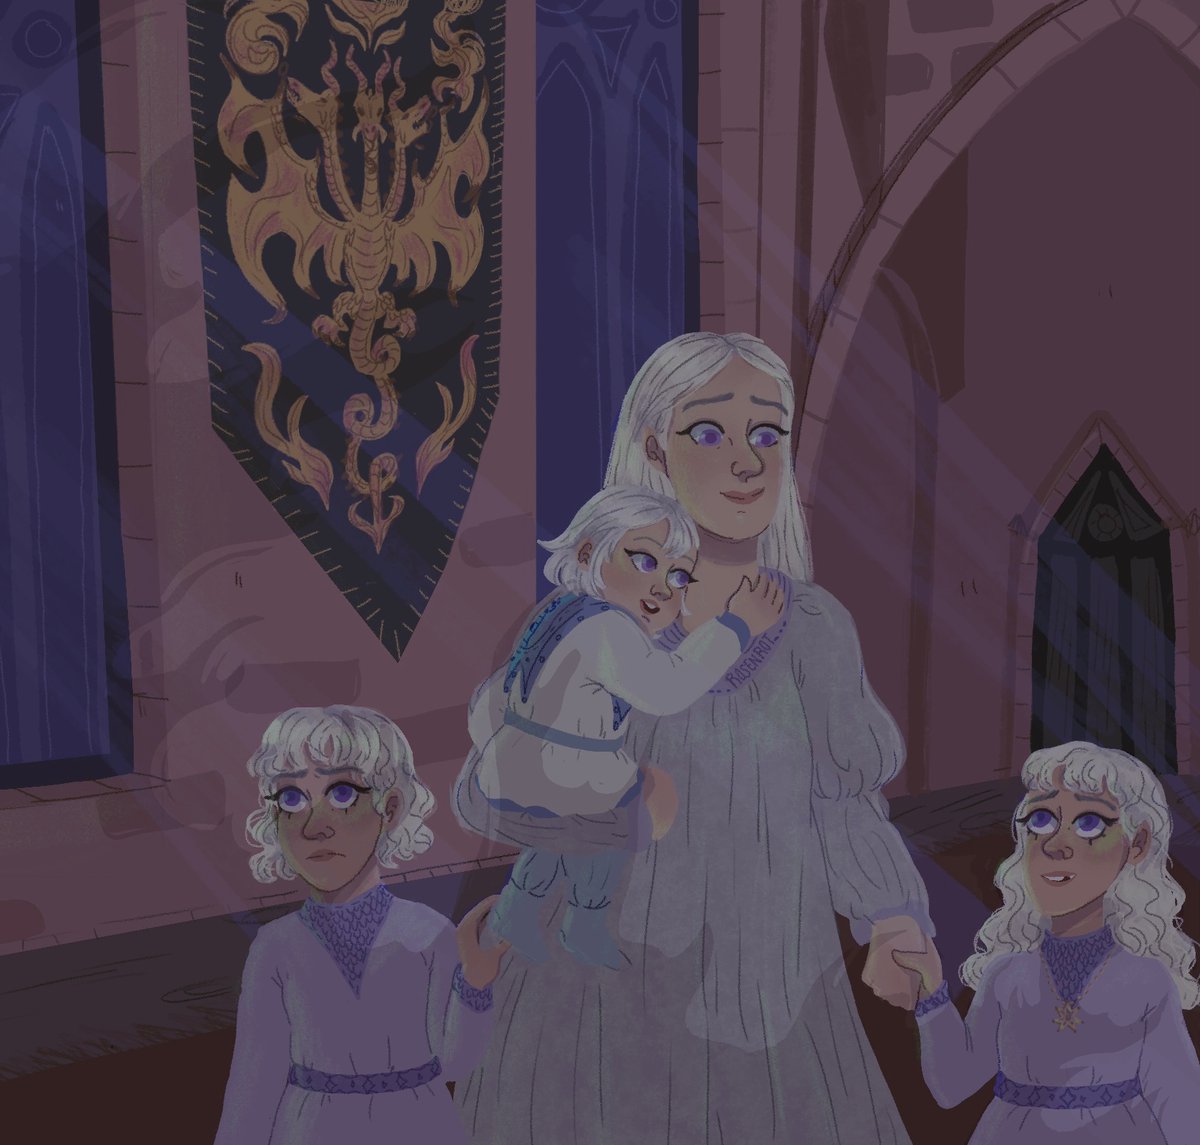 “Then they settled down to wait, for they knew it was the custom of Queen Helaena to bring her children to see their grandmother every evening before bed.” #fireandblood #helaenatargaryen #art #illustration #digitalart #asoiaf #fanart